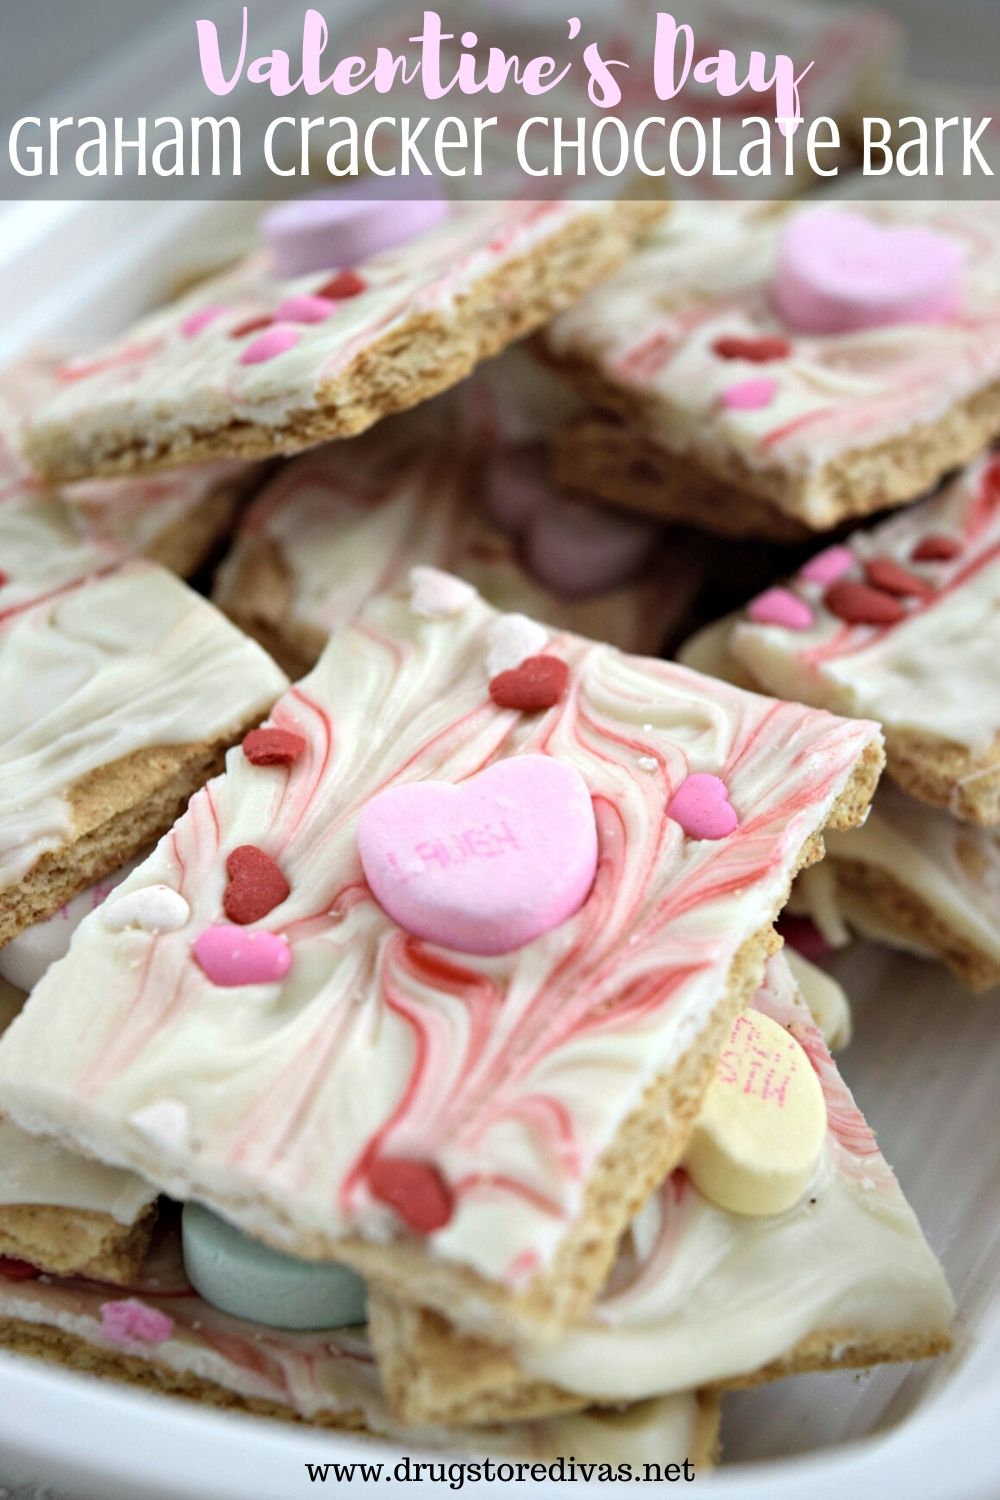 White and red candy bark on top of a graham cracker with heart candies in it and the words "Valentine's Day Graham Cracker Chocolate Bark" digitally written on top.